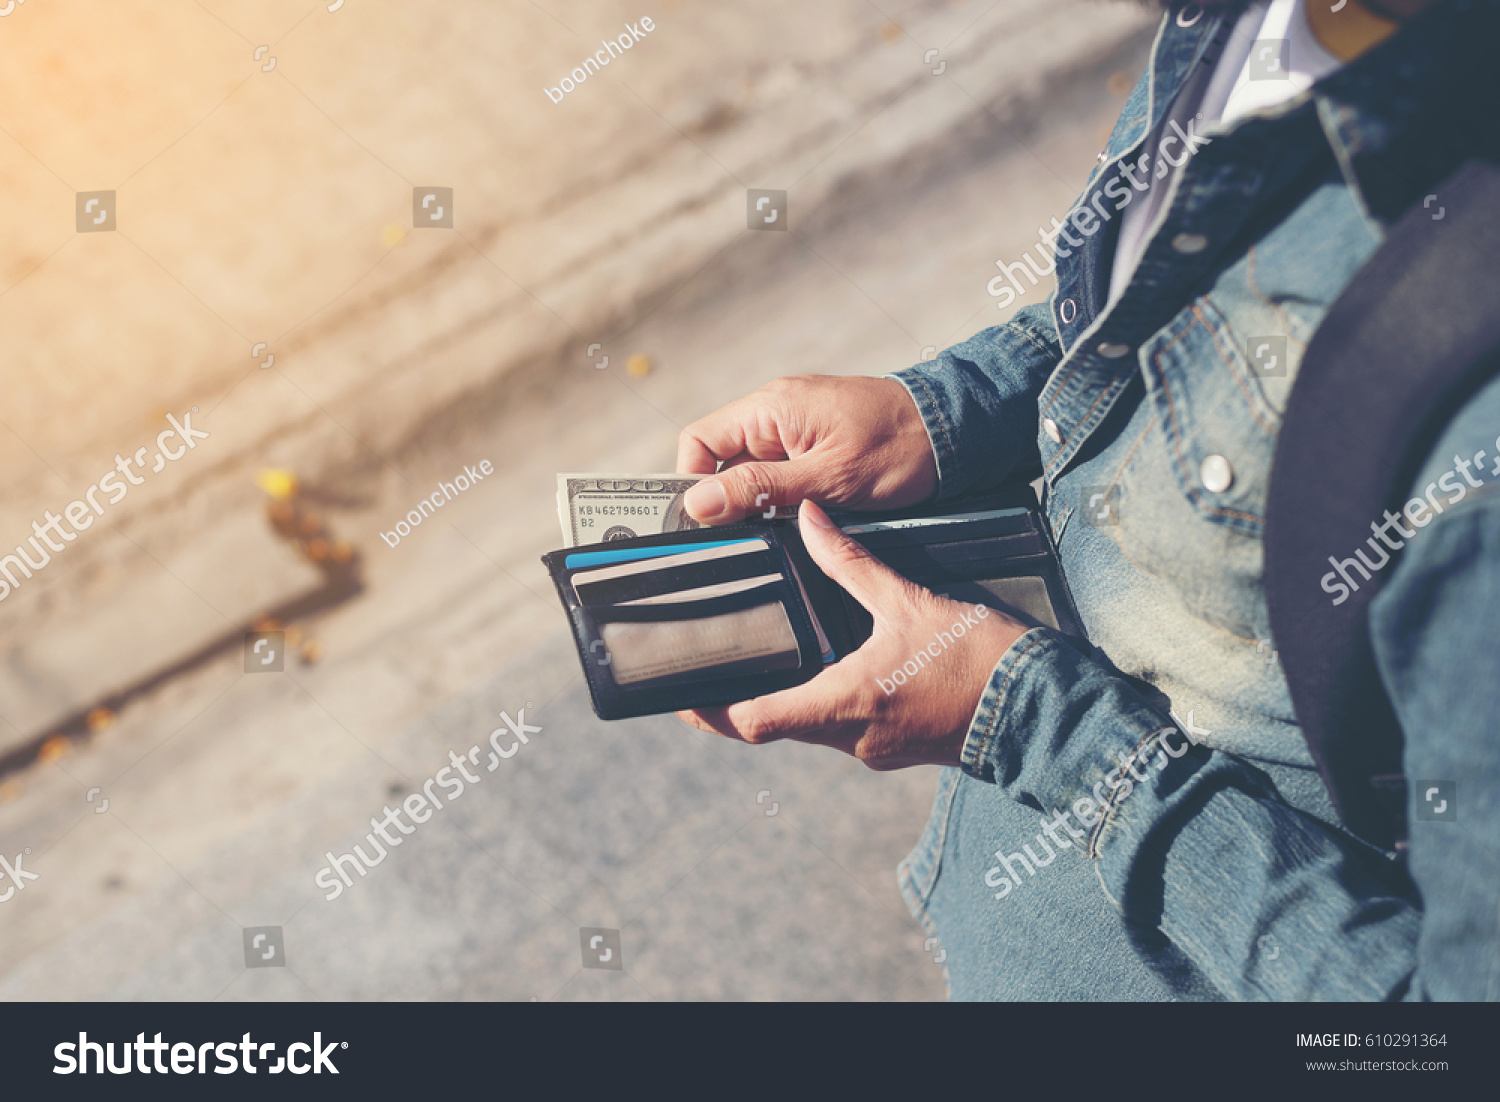 Hipster man hands holding wallet with credit cards and stack of money. #610291364